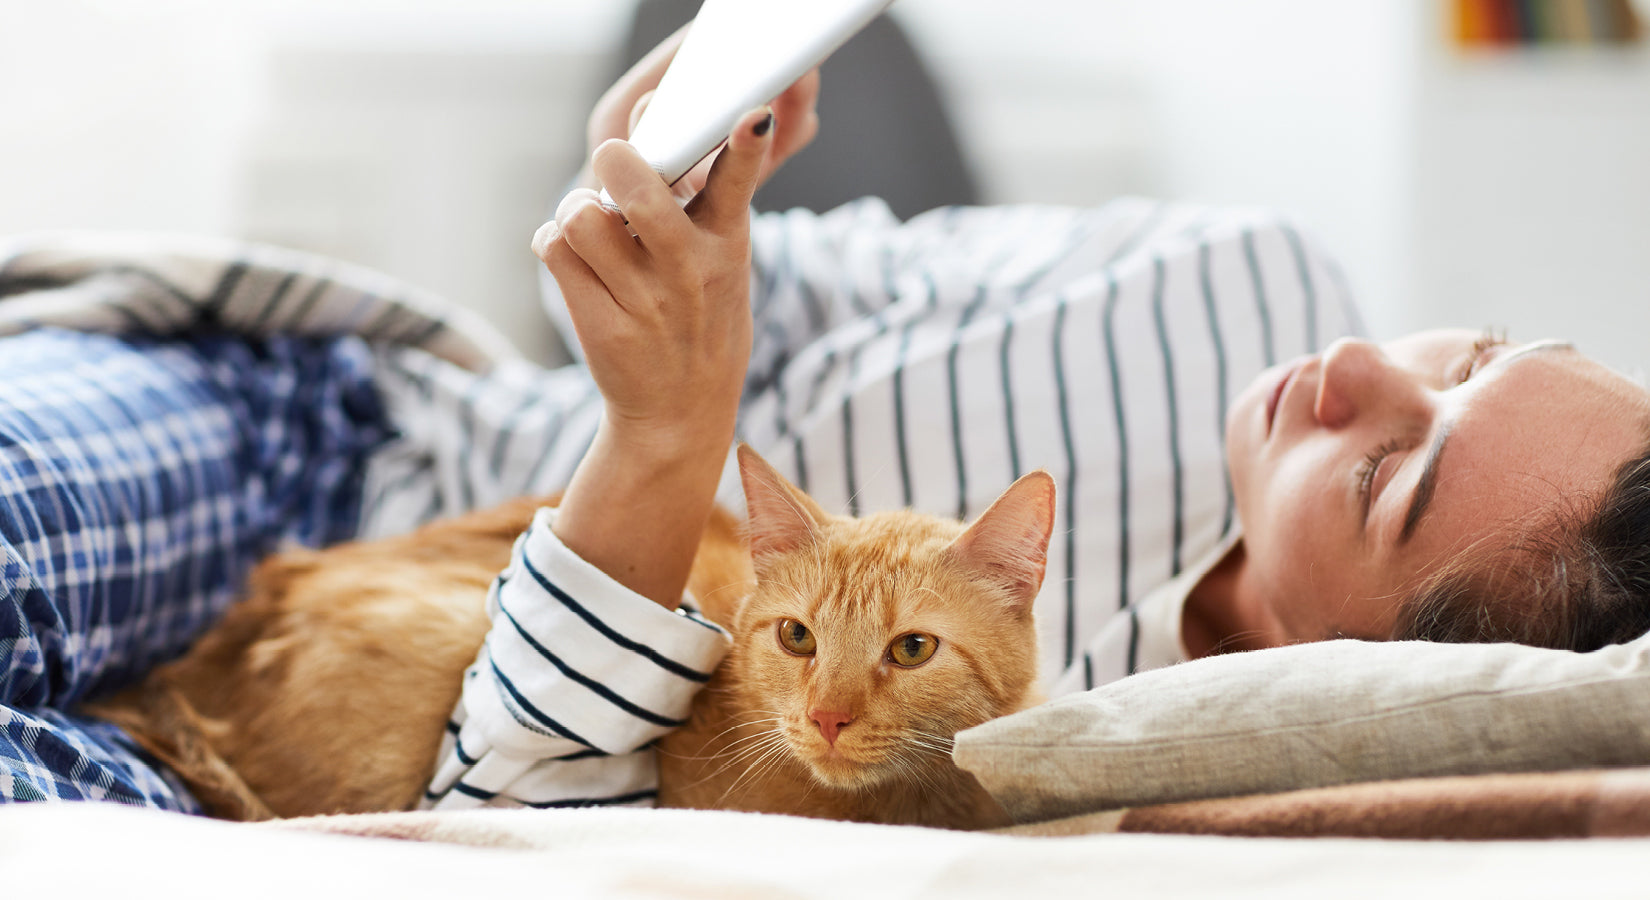 Co-dependent or casual? New quiz reveals what type of relationship you have with your cat